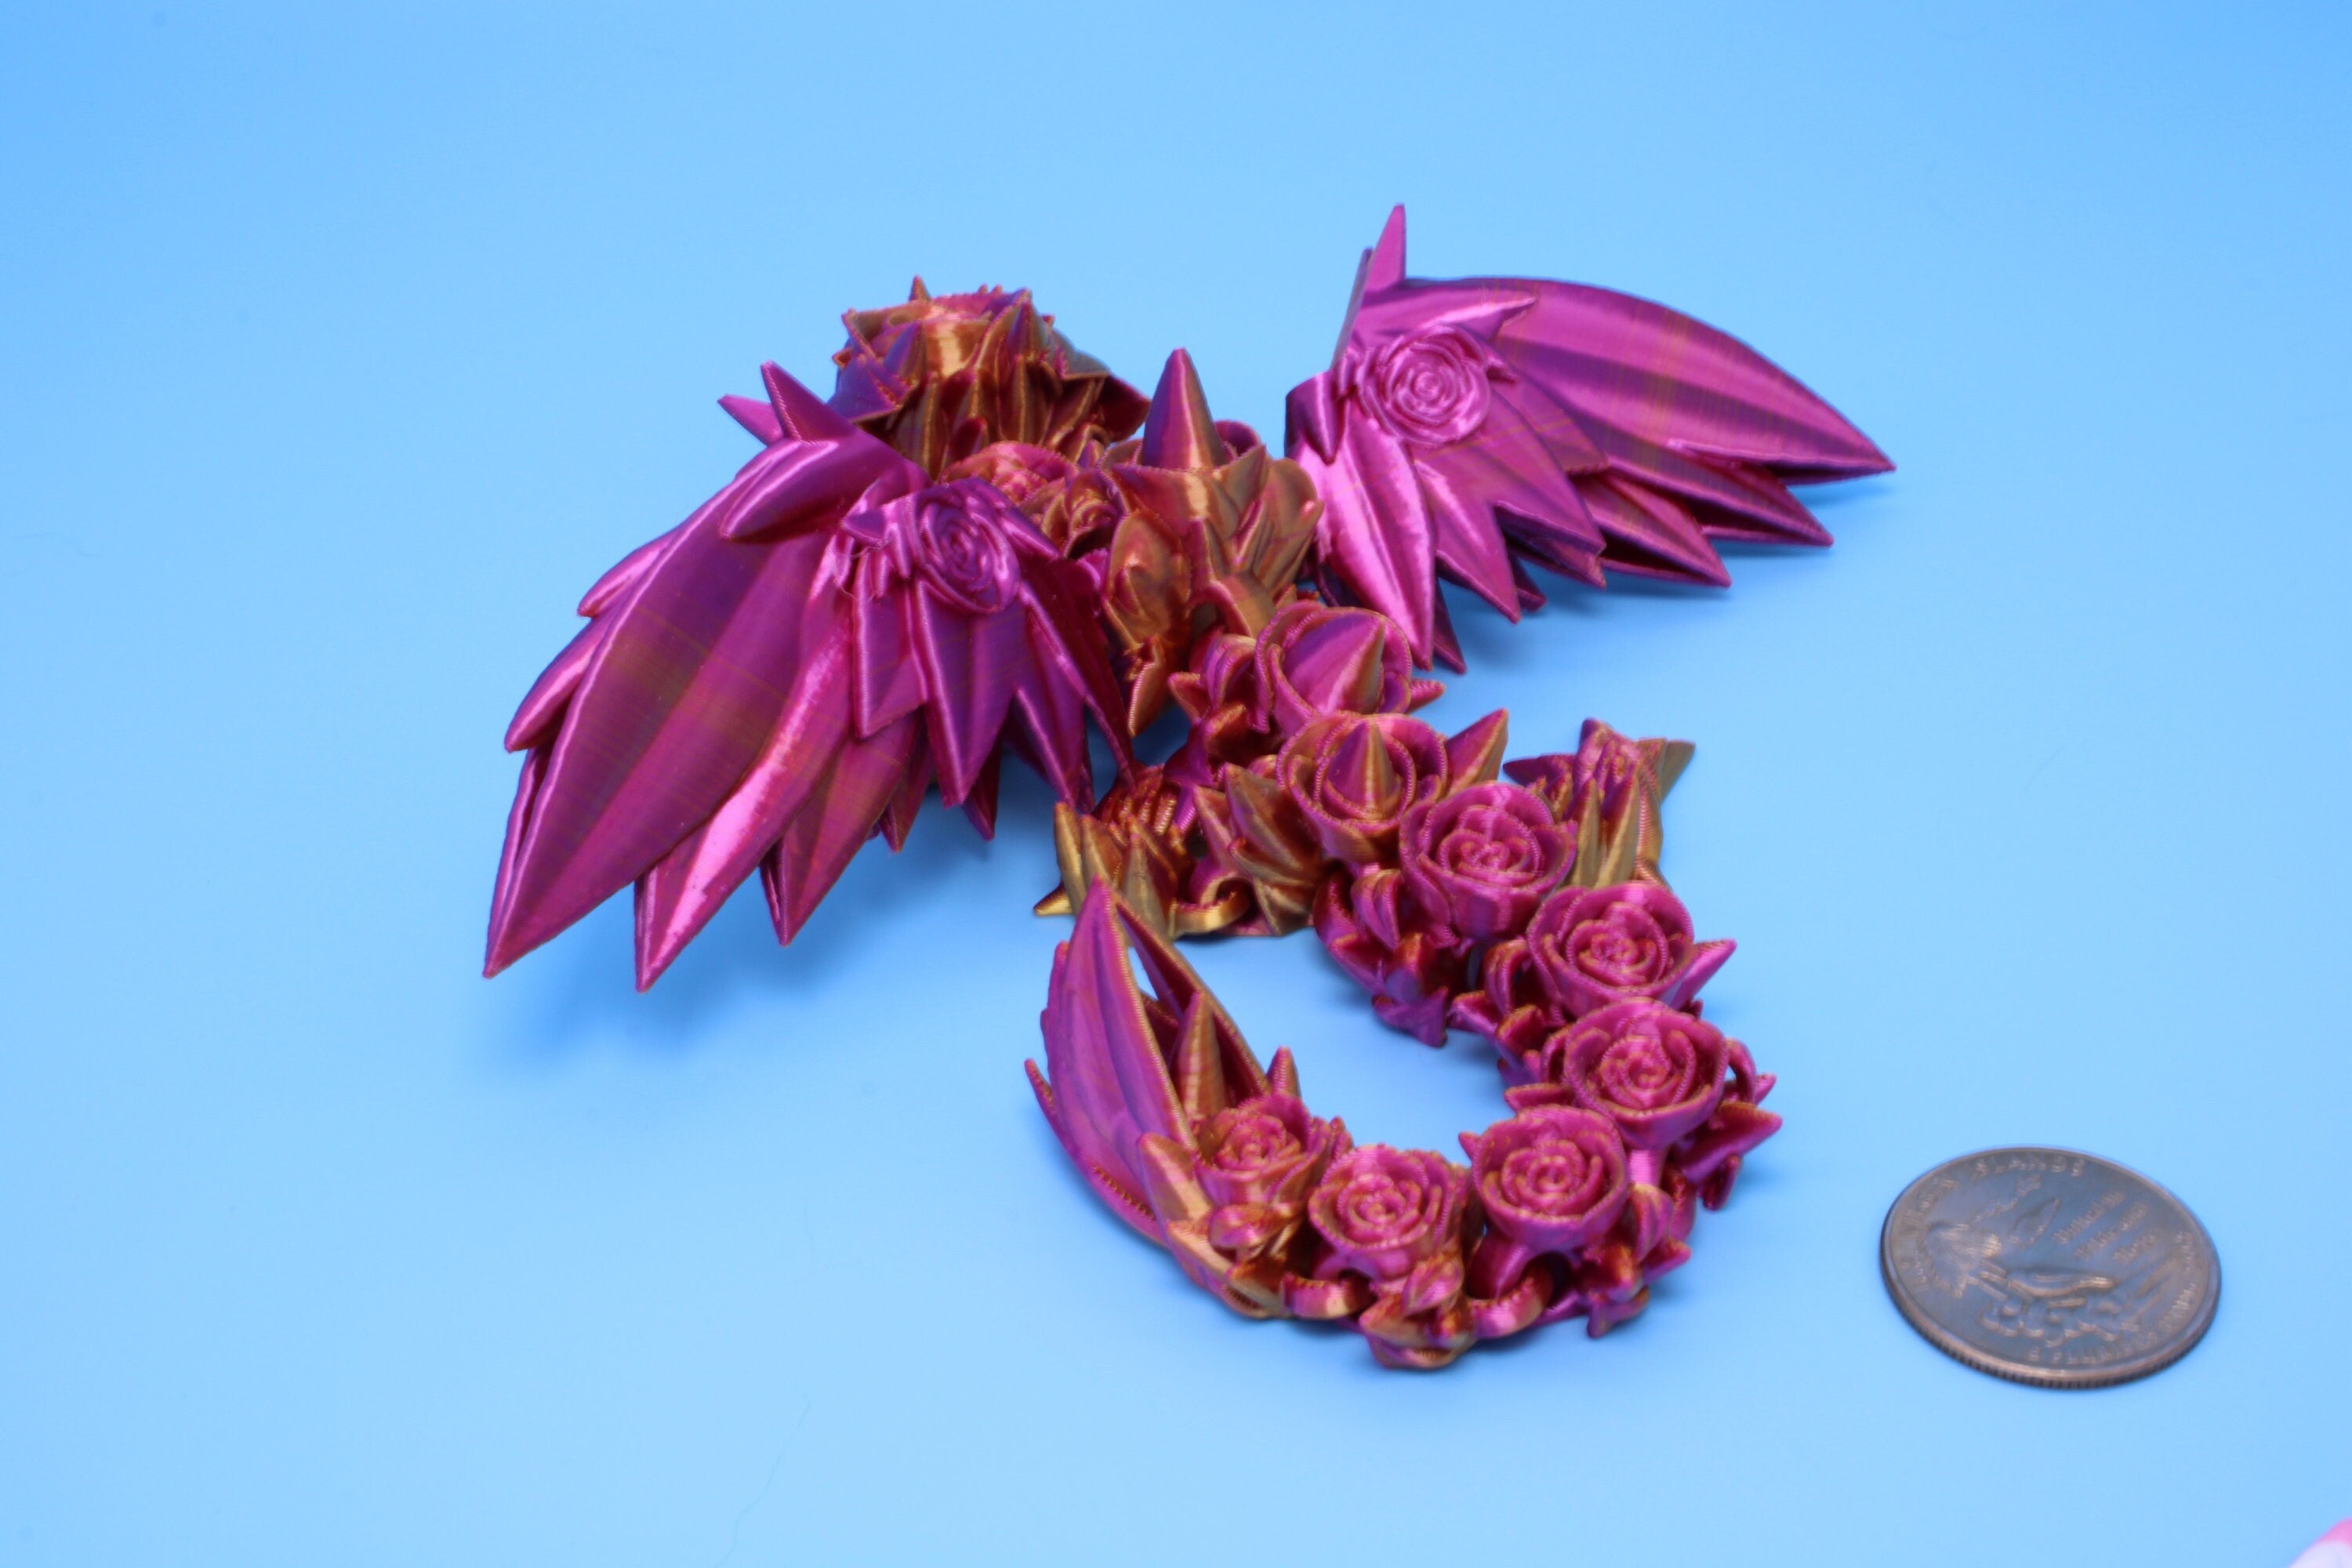 Baby Rose Wing Dragon | Pink & Gold | 3D Printed | Fidget | Flexi Toy 8.5 in. | Stress Relief Gift